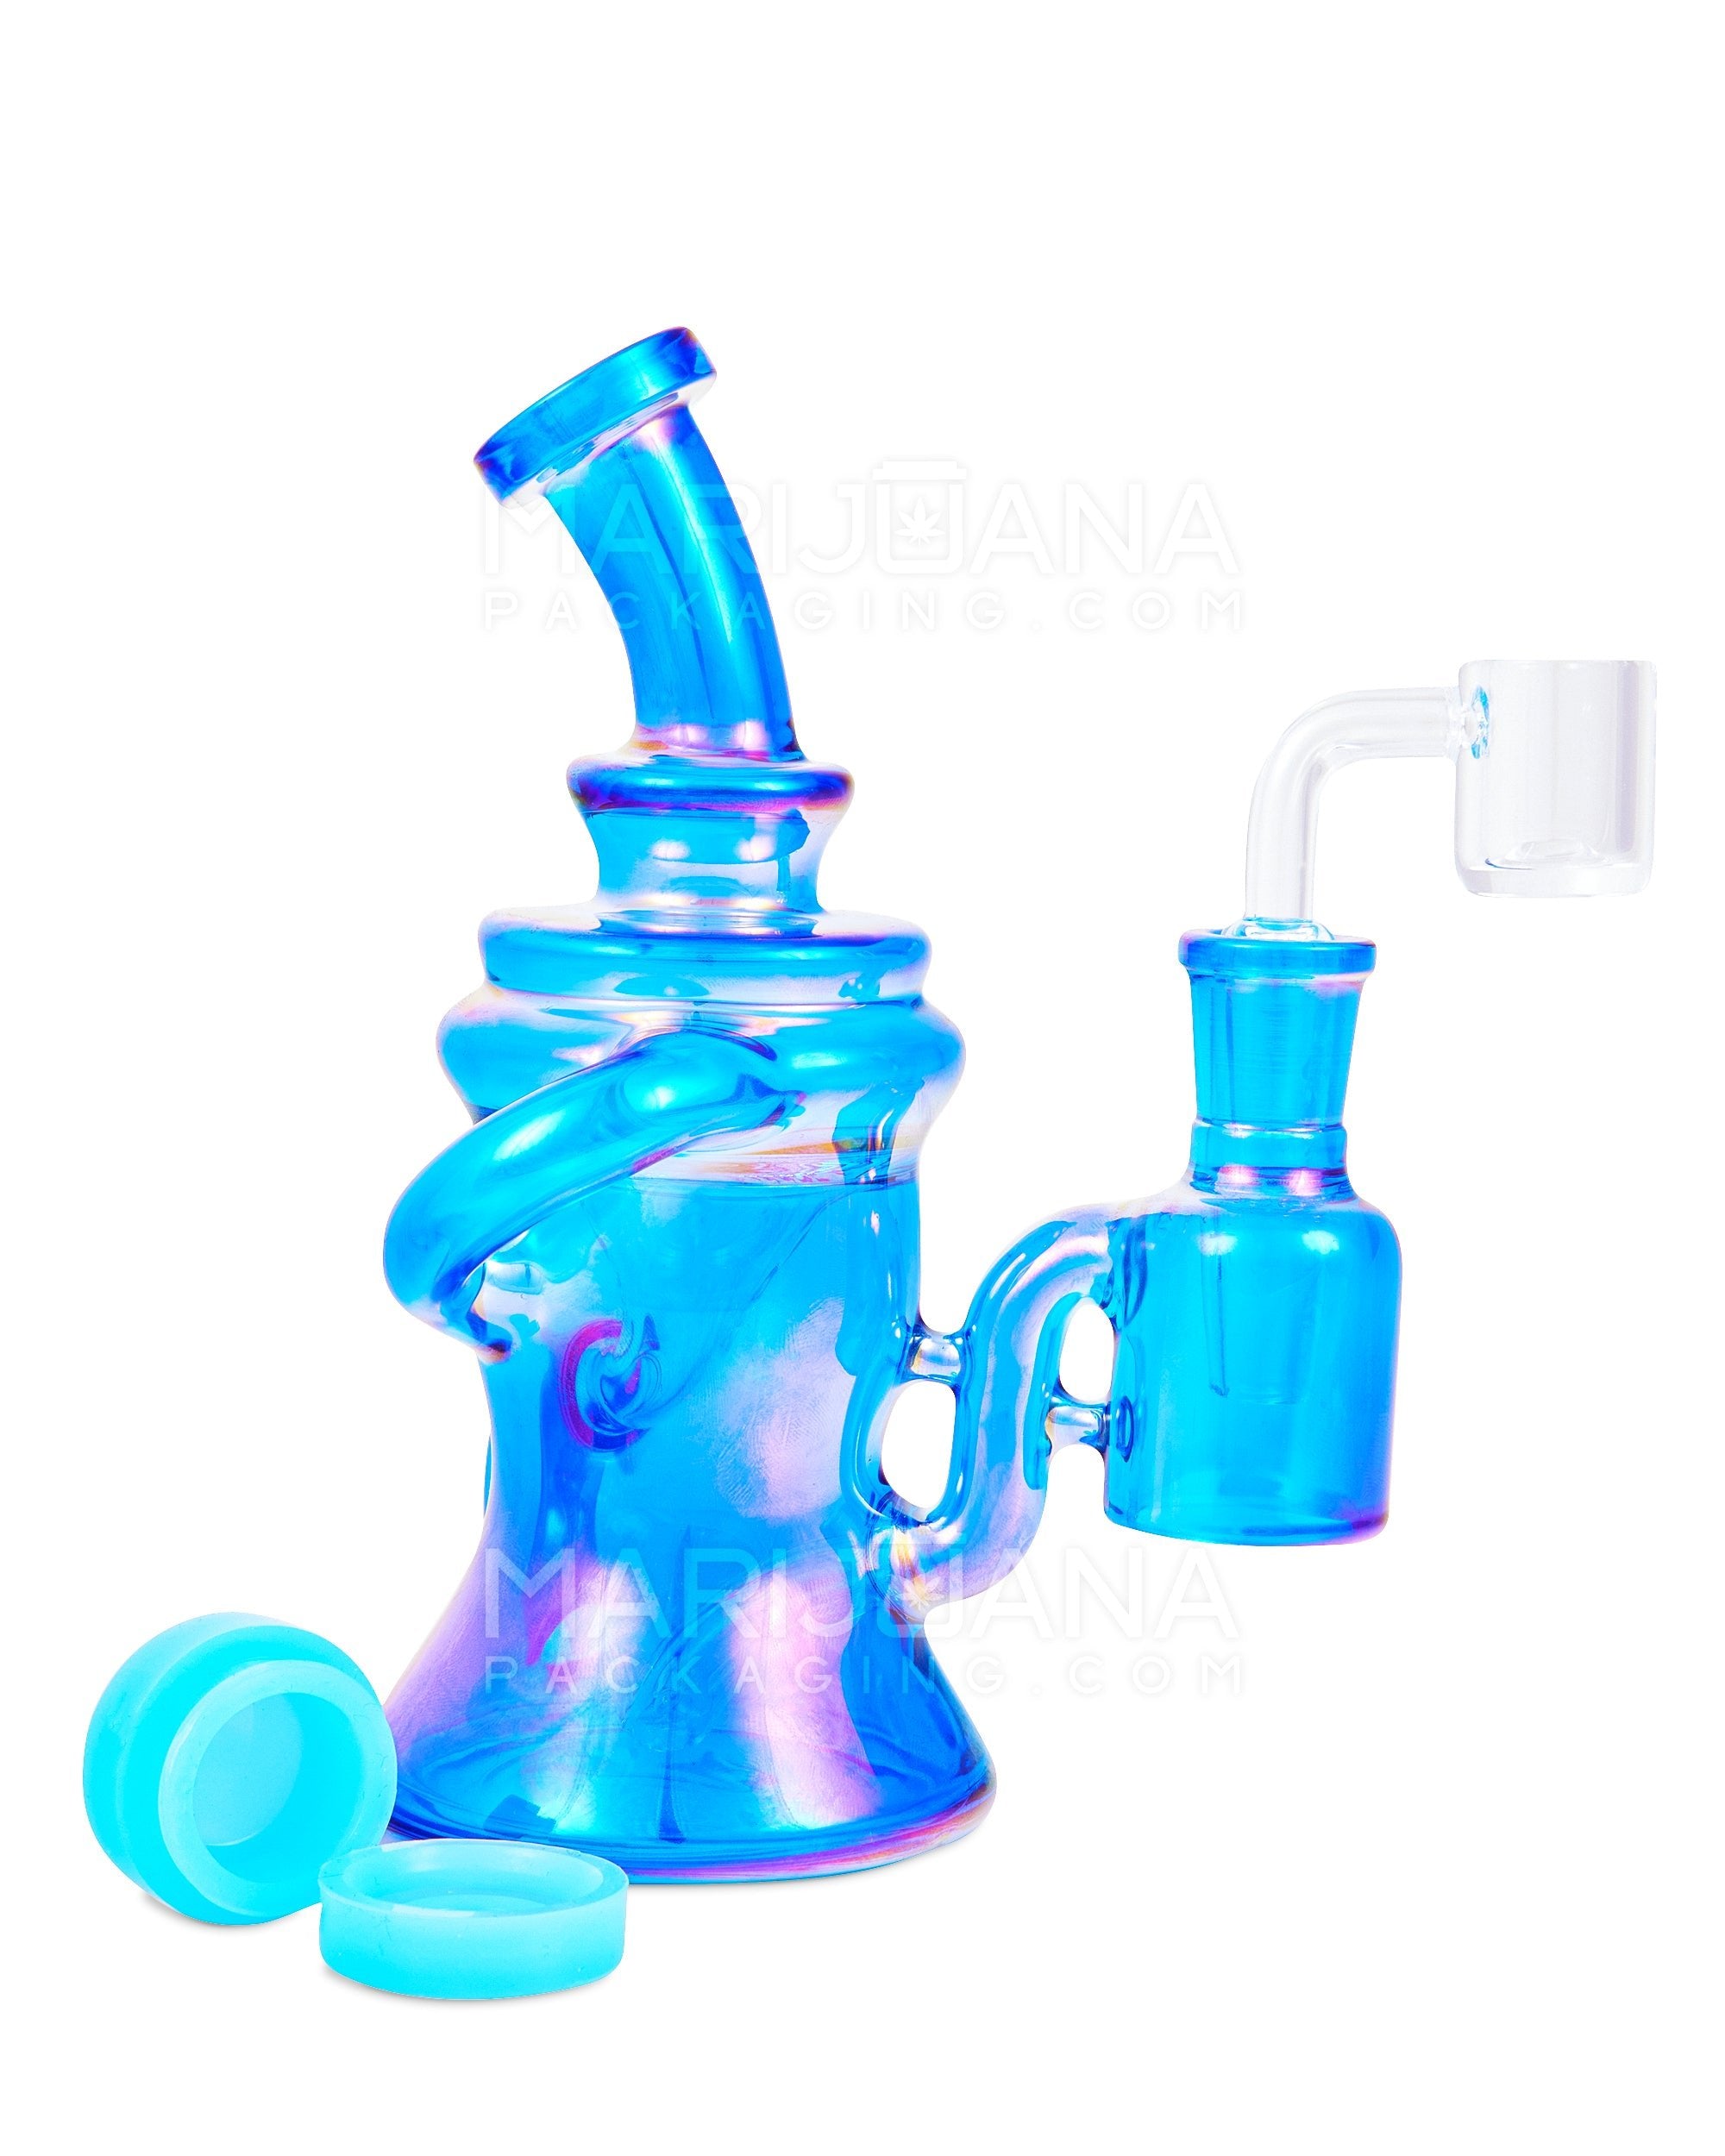 Bent Neck Iridescent Recycler Glass Dab Rig w/ Silicone Claim Catcher | 7in Tall - 14mm Banger - Blue - 1